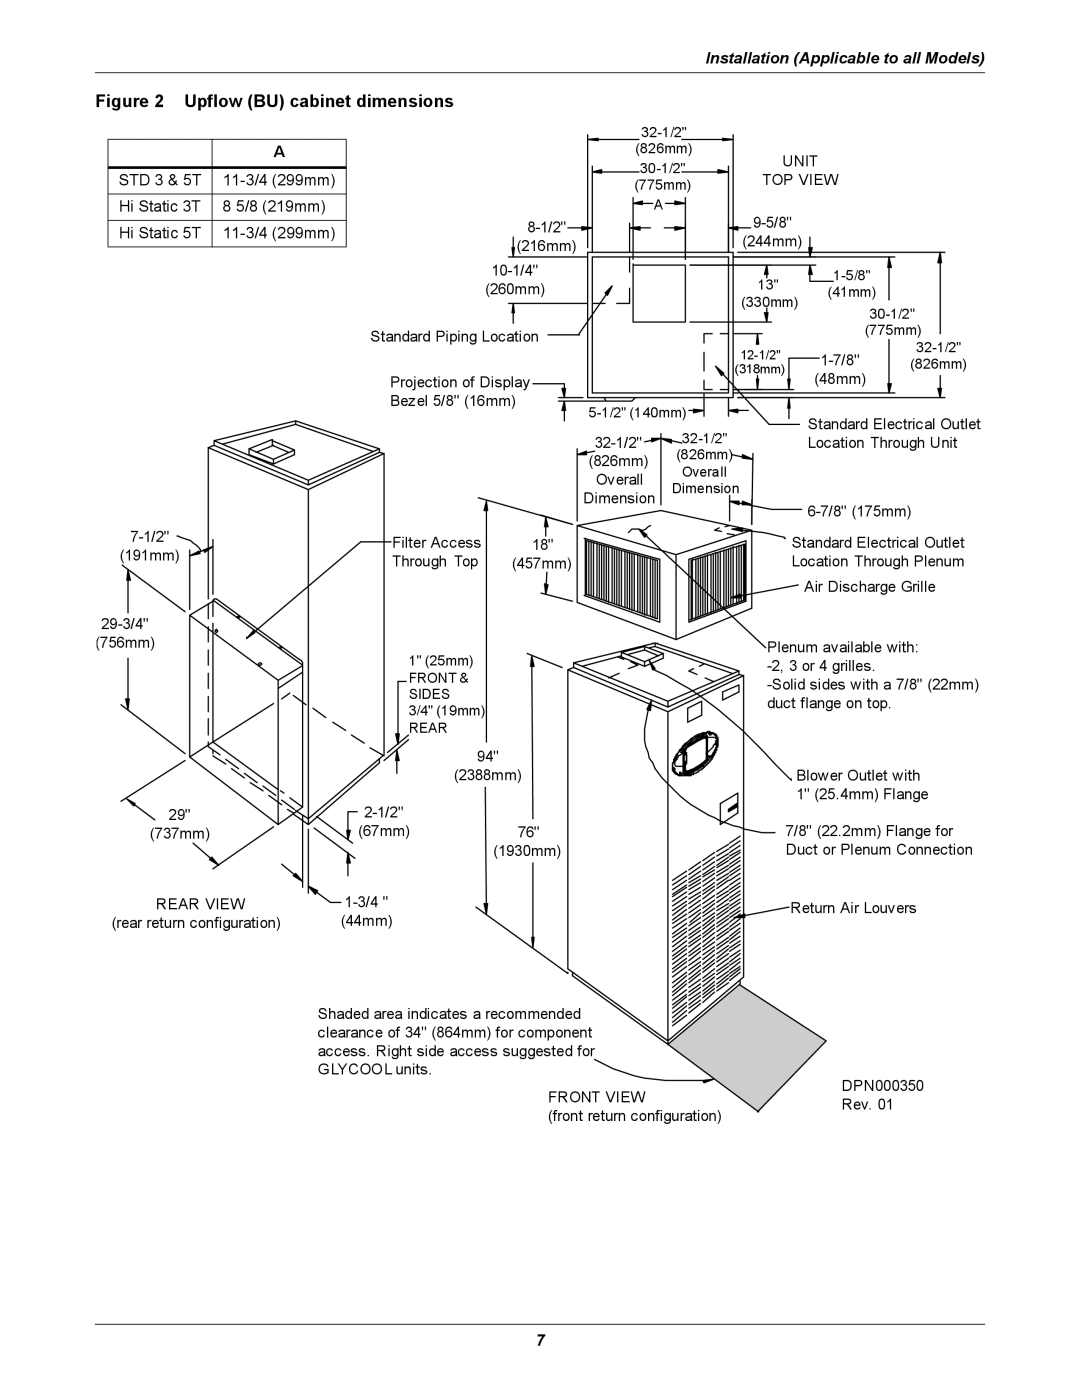 Emerson 3000 installation manual Upflow BU cabinet dimensions, Installation Applicable to all Models 